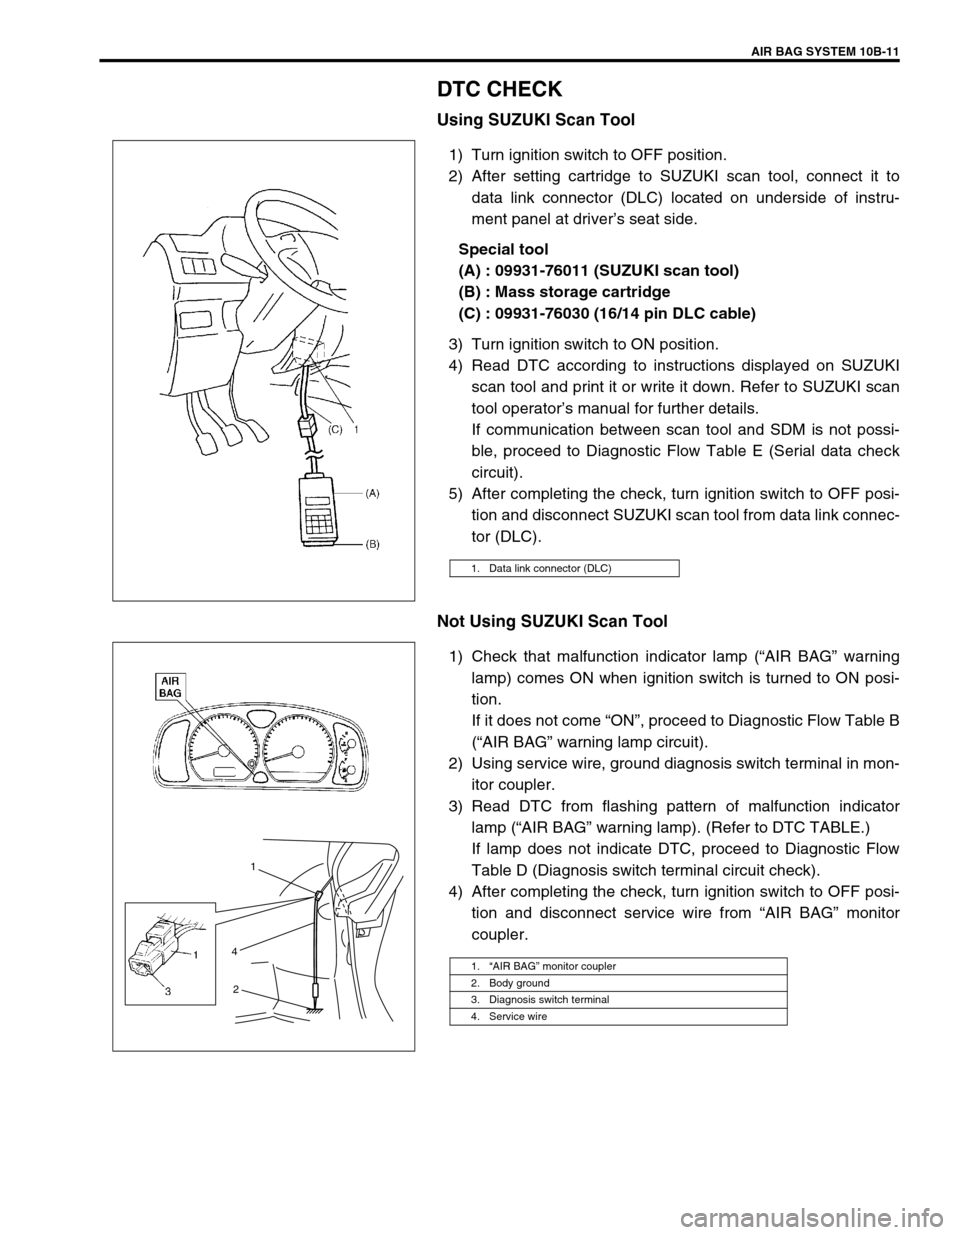 SUZUKI SWIFT 2000 1.G Transmission Service Workshop Manual AIR BAG SYSTEM 10B-11
DTC CHECK
Using SUZUKI Scan Tool
1) Turn ignition switch to OFF position.
2) After setting cartridge to SUZUKI scan tool, connect it to
data link connector (DLC) located on under